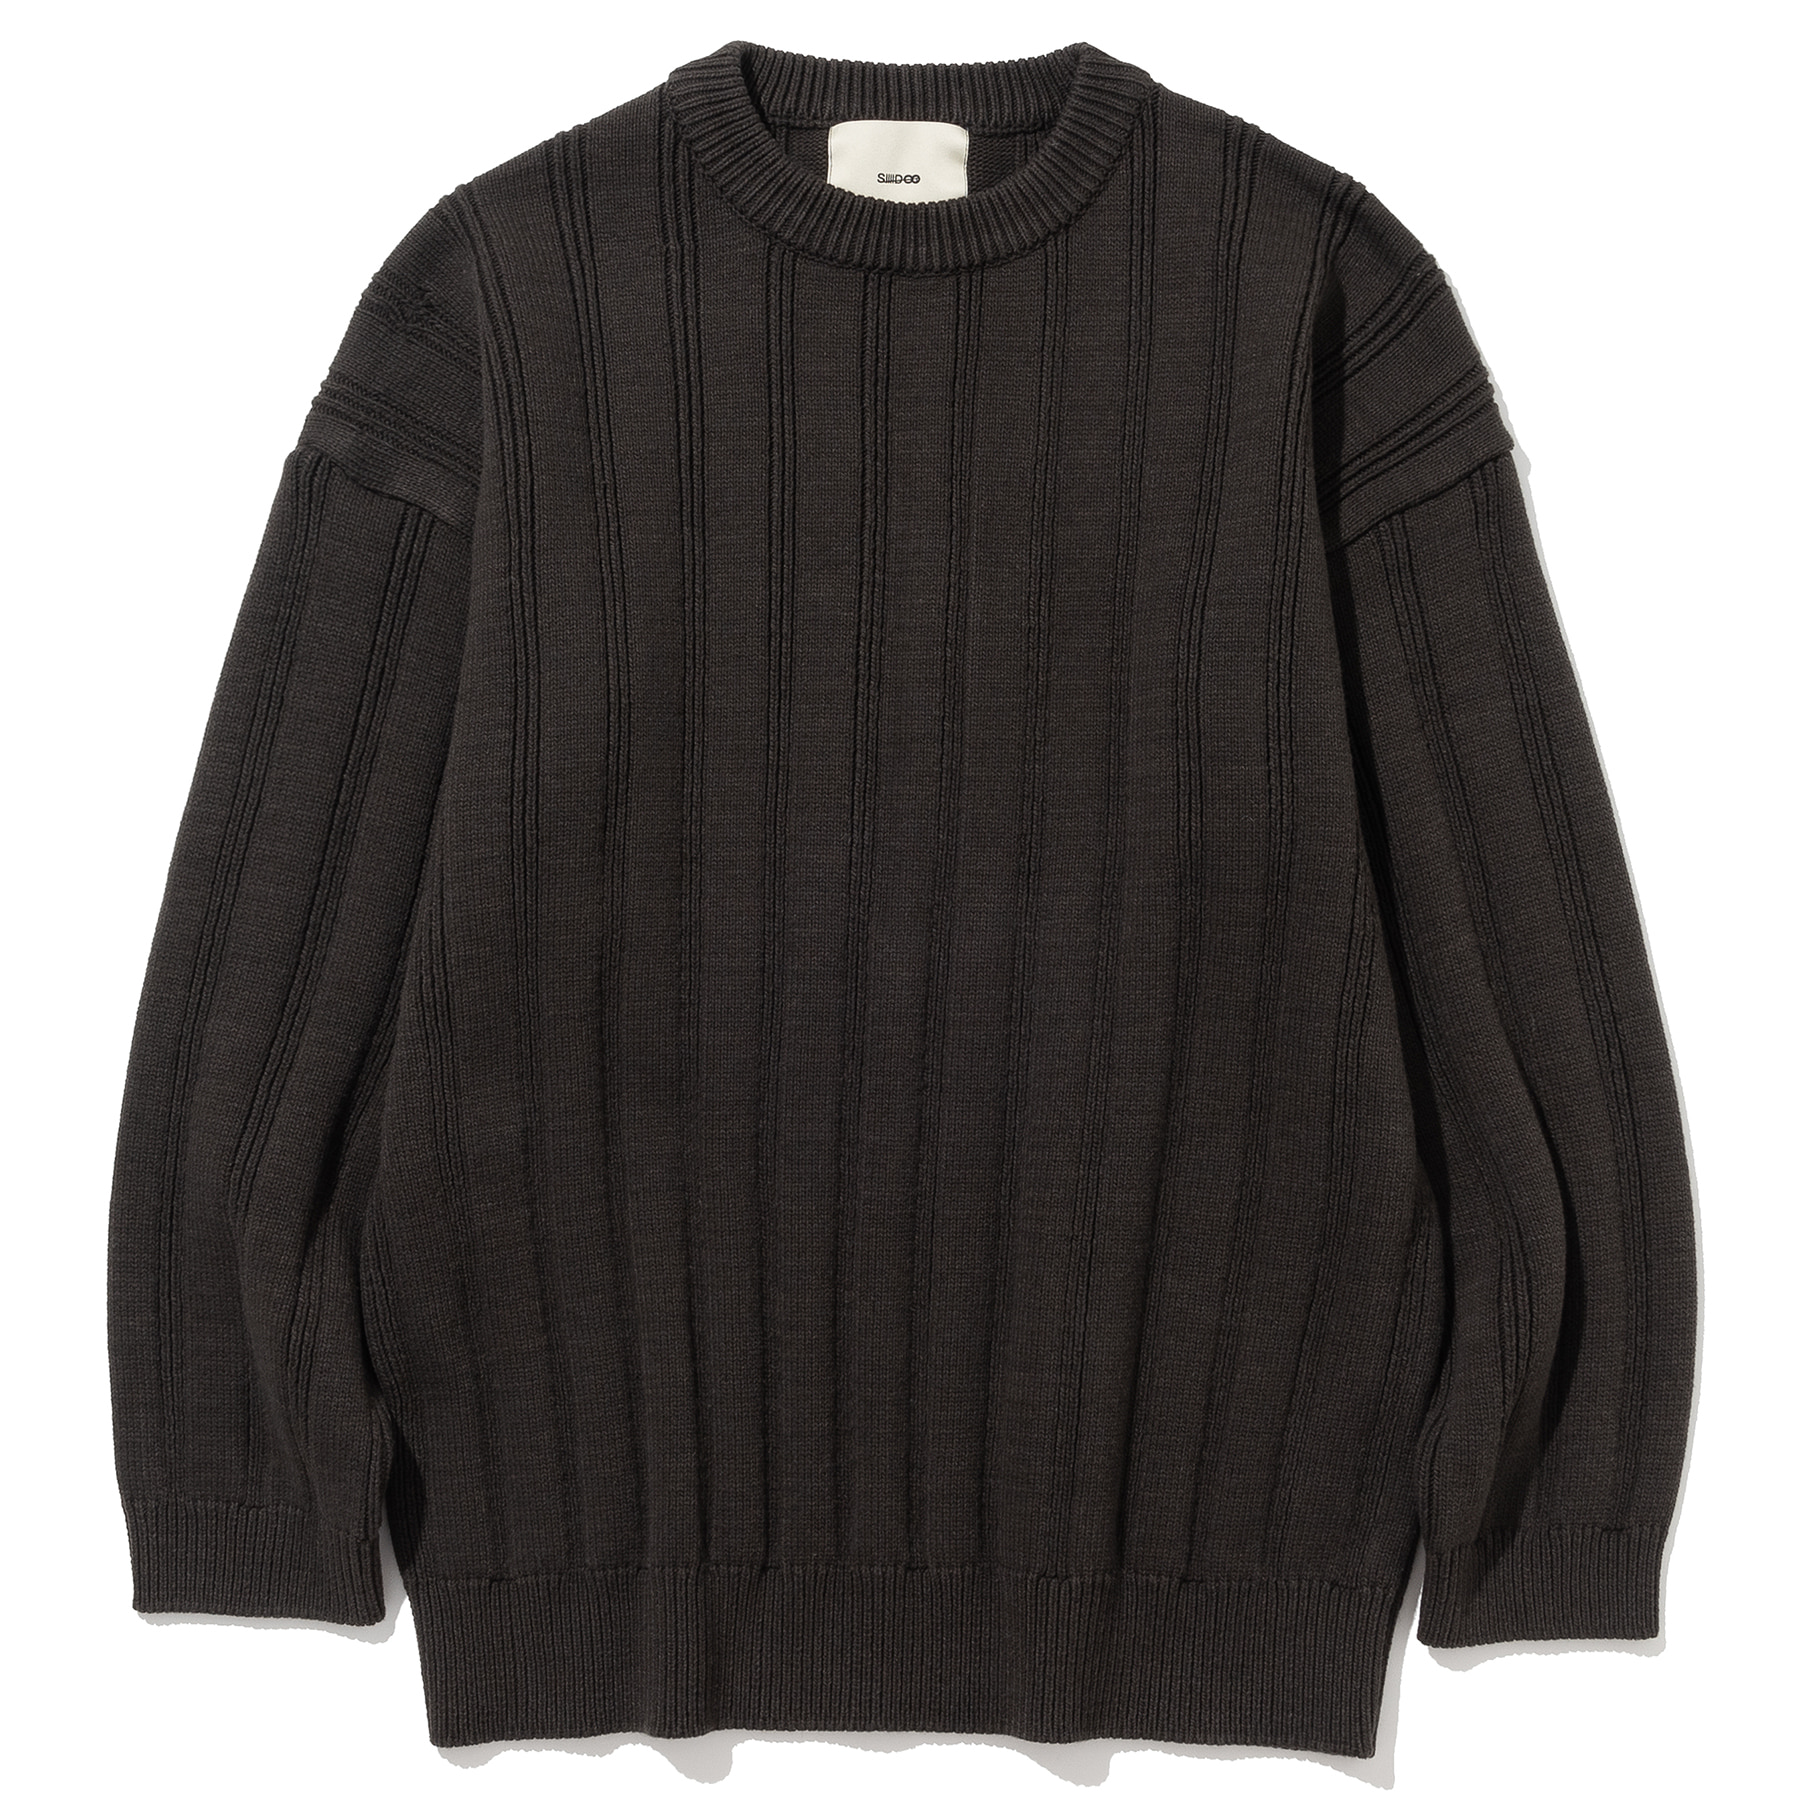 SOLID LINE CREW NECK SWEATER #1(단독발매)